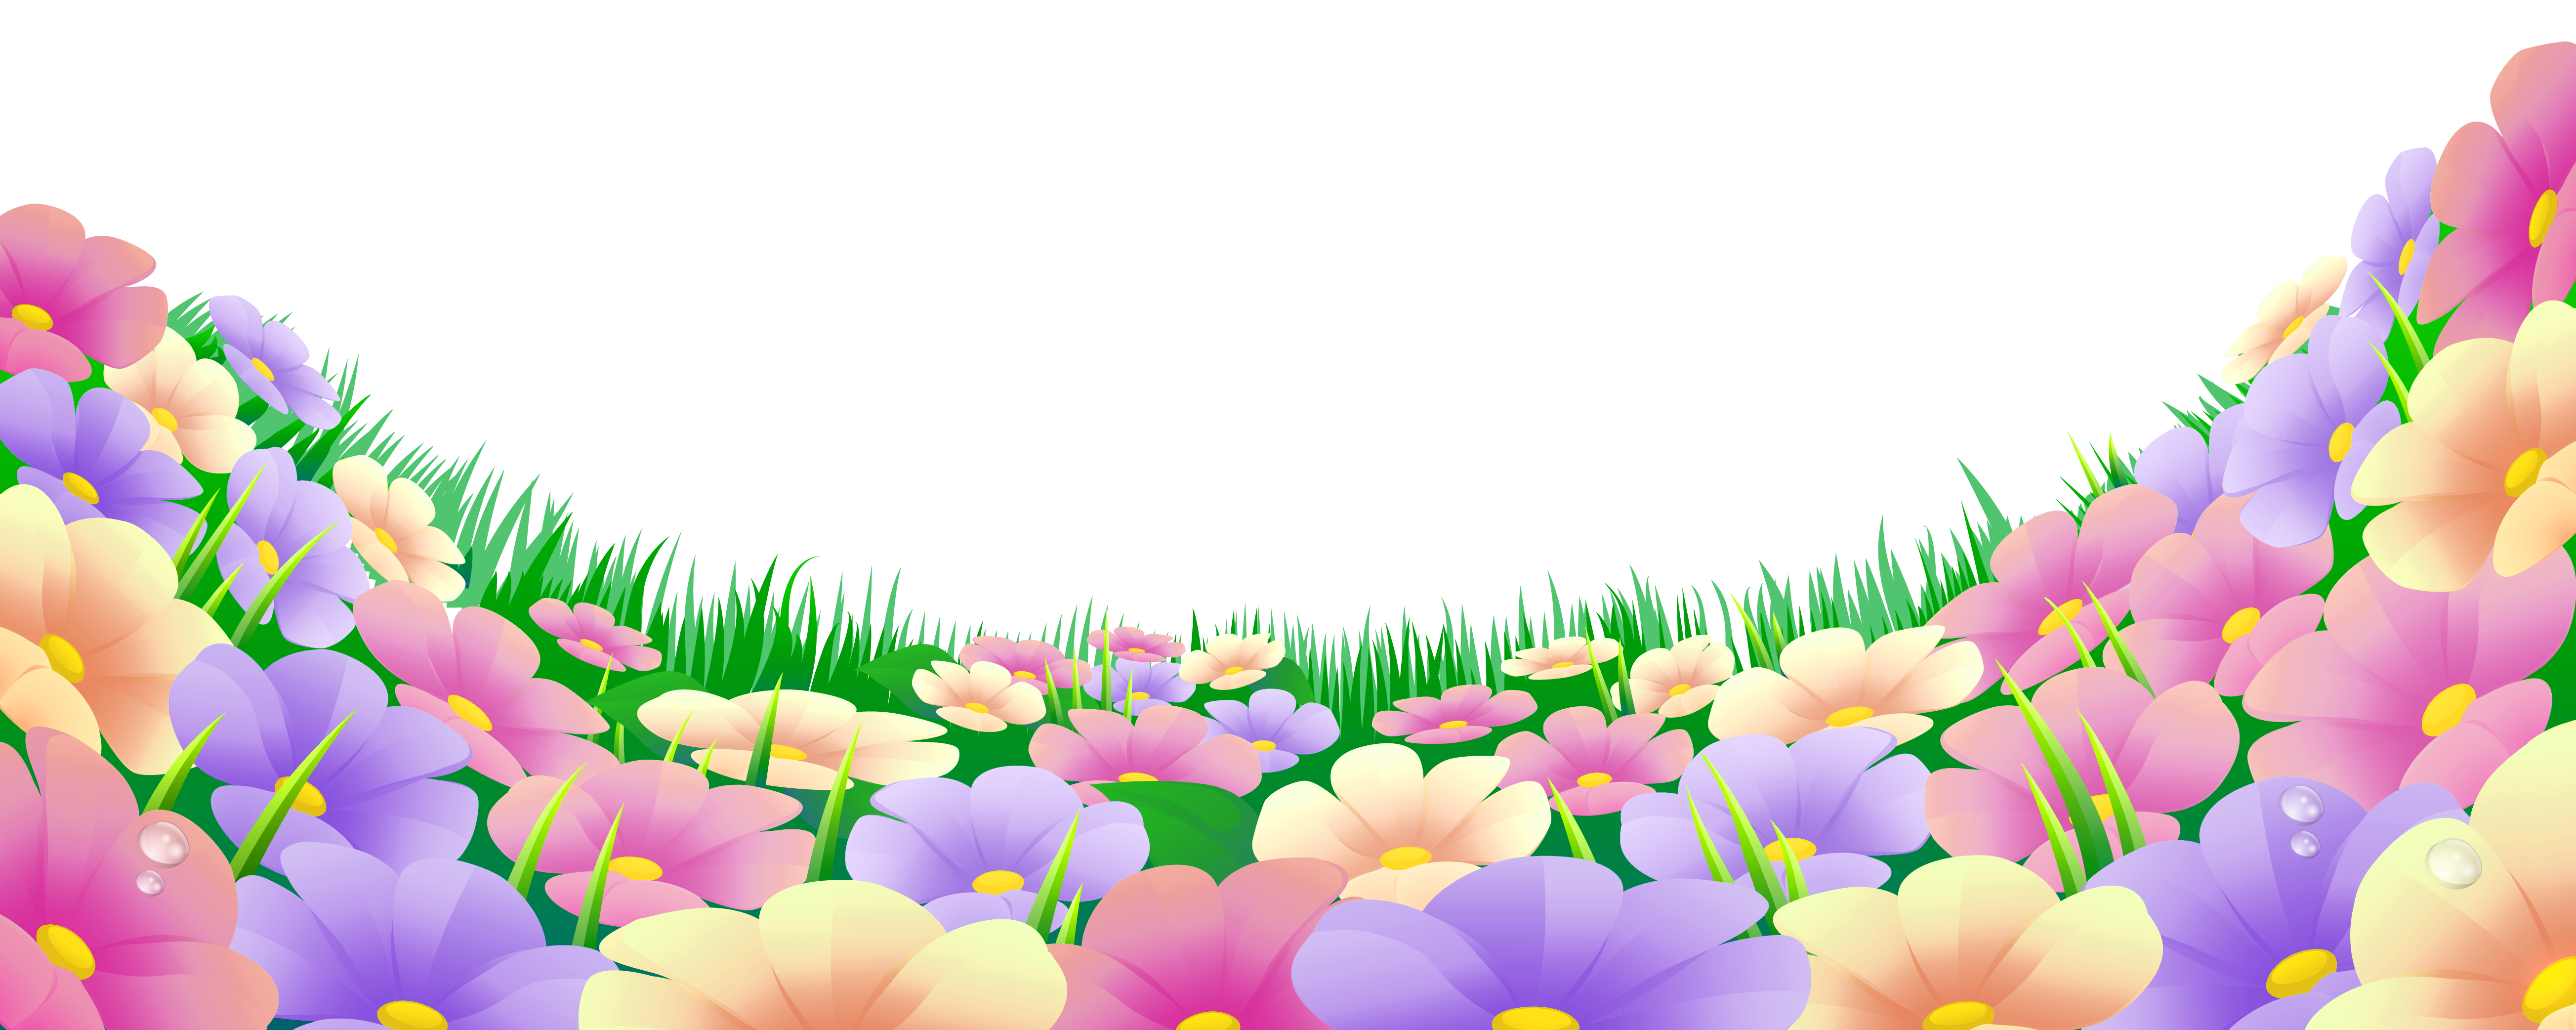 Beautiful clipart. Grass with flowers png